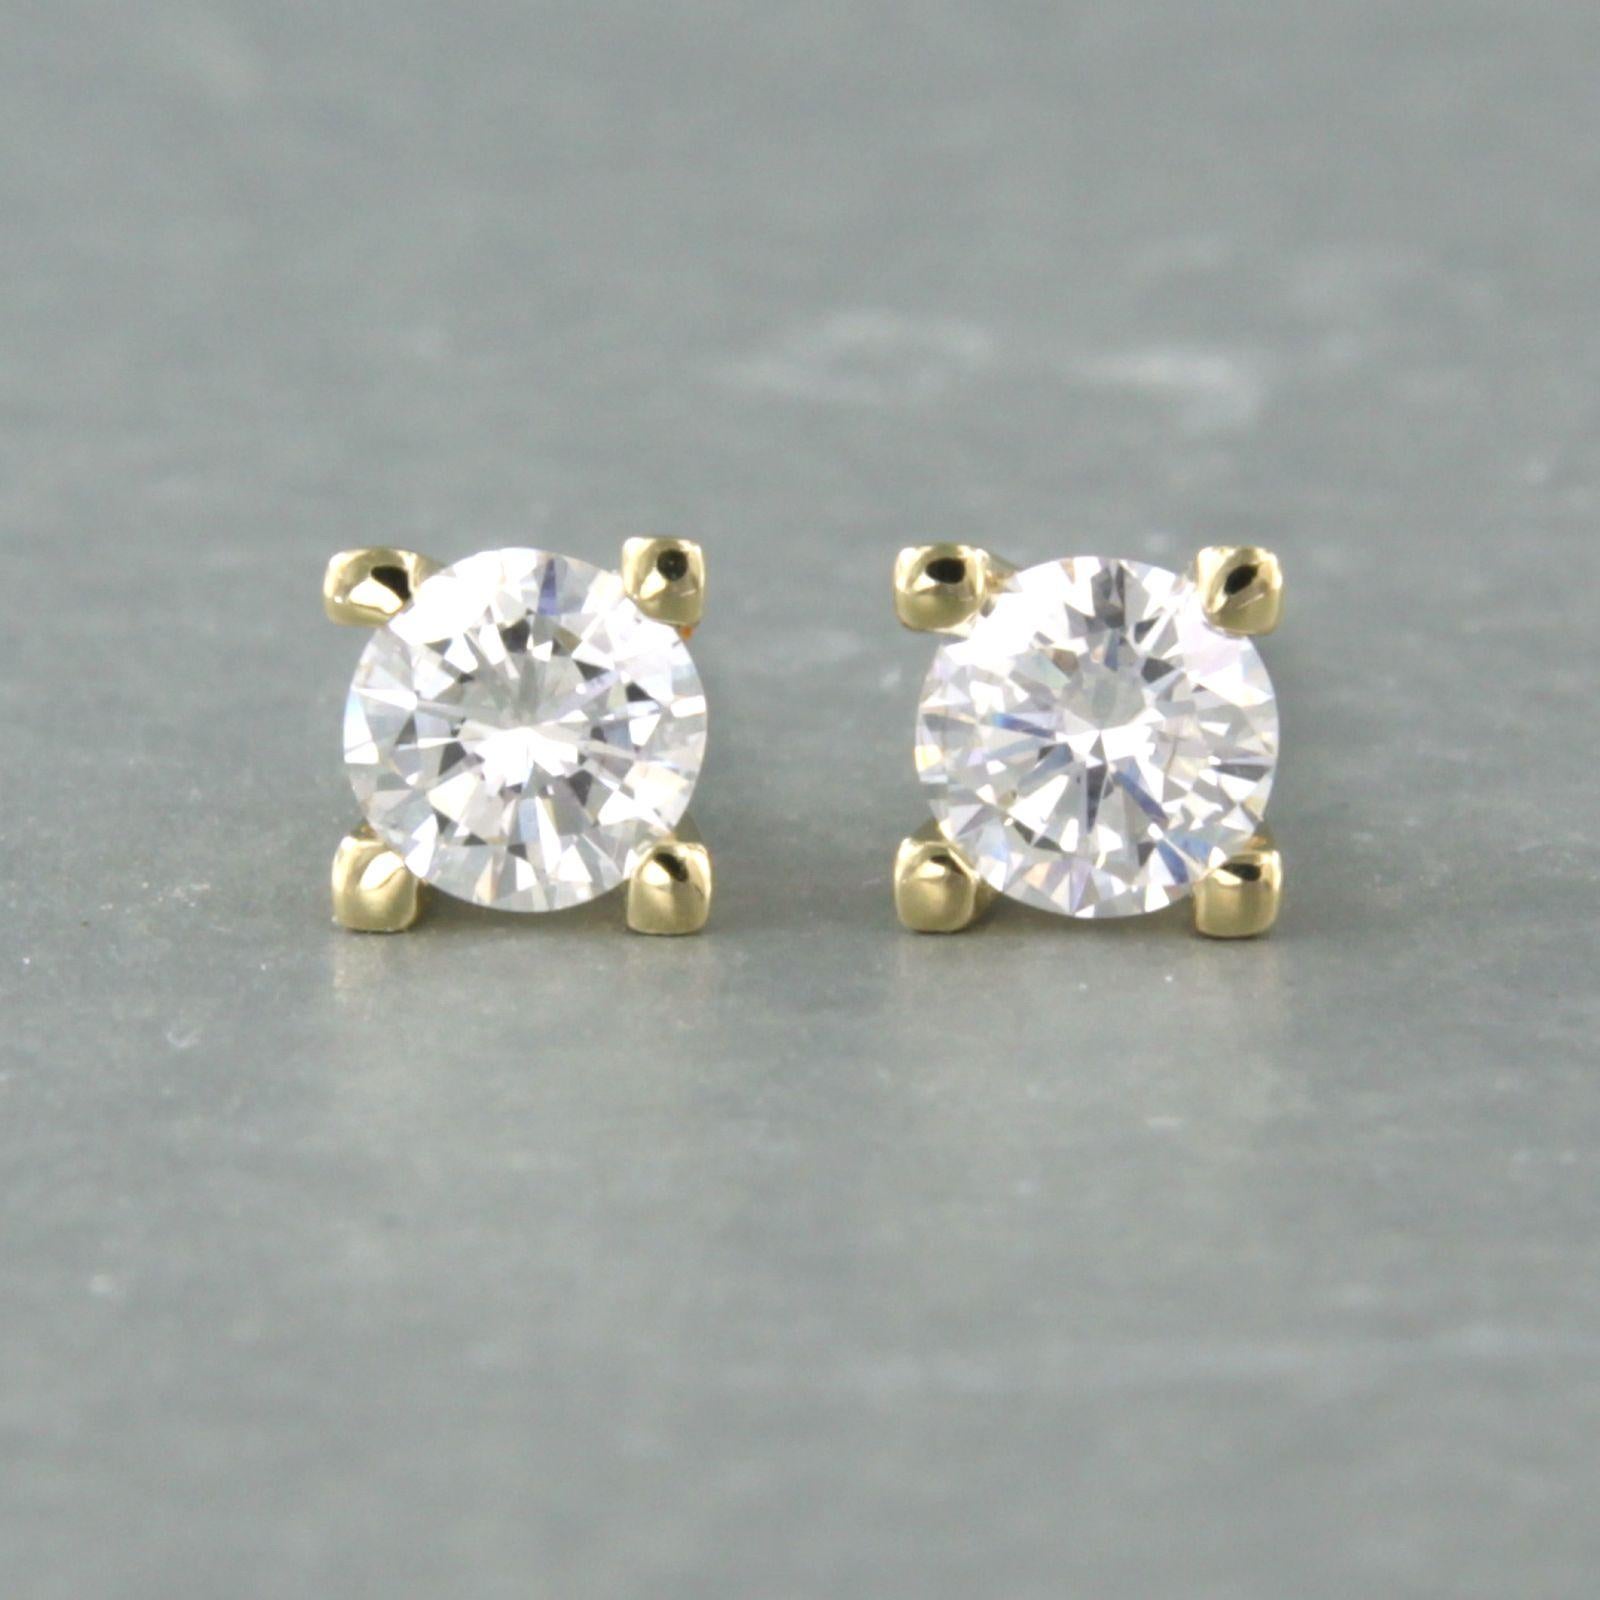 14k yellow gold solitaire ear studs set with brilliant cut diamonds up to 0.70ct - J/K - VS/SI

Detailed description:

The front of the ear stud is 5.0 mm wide

weight 1.8 grams

occupied with

- 2 x 4.4 mm brilliant cut diamond, total approximately